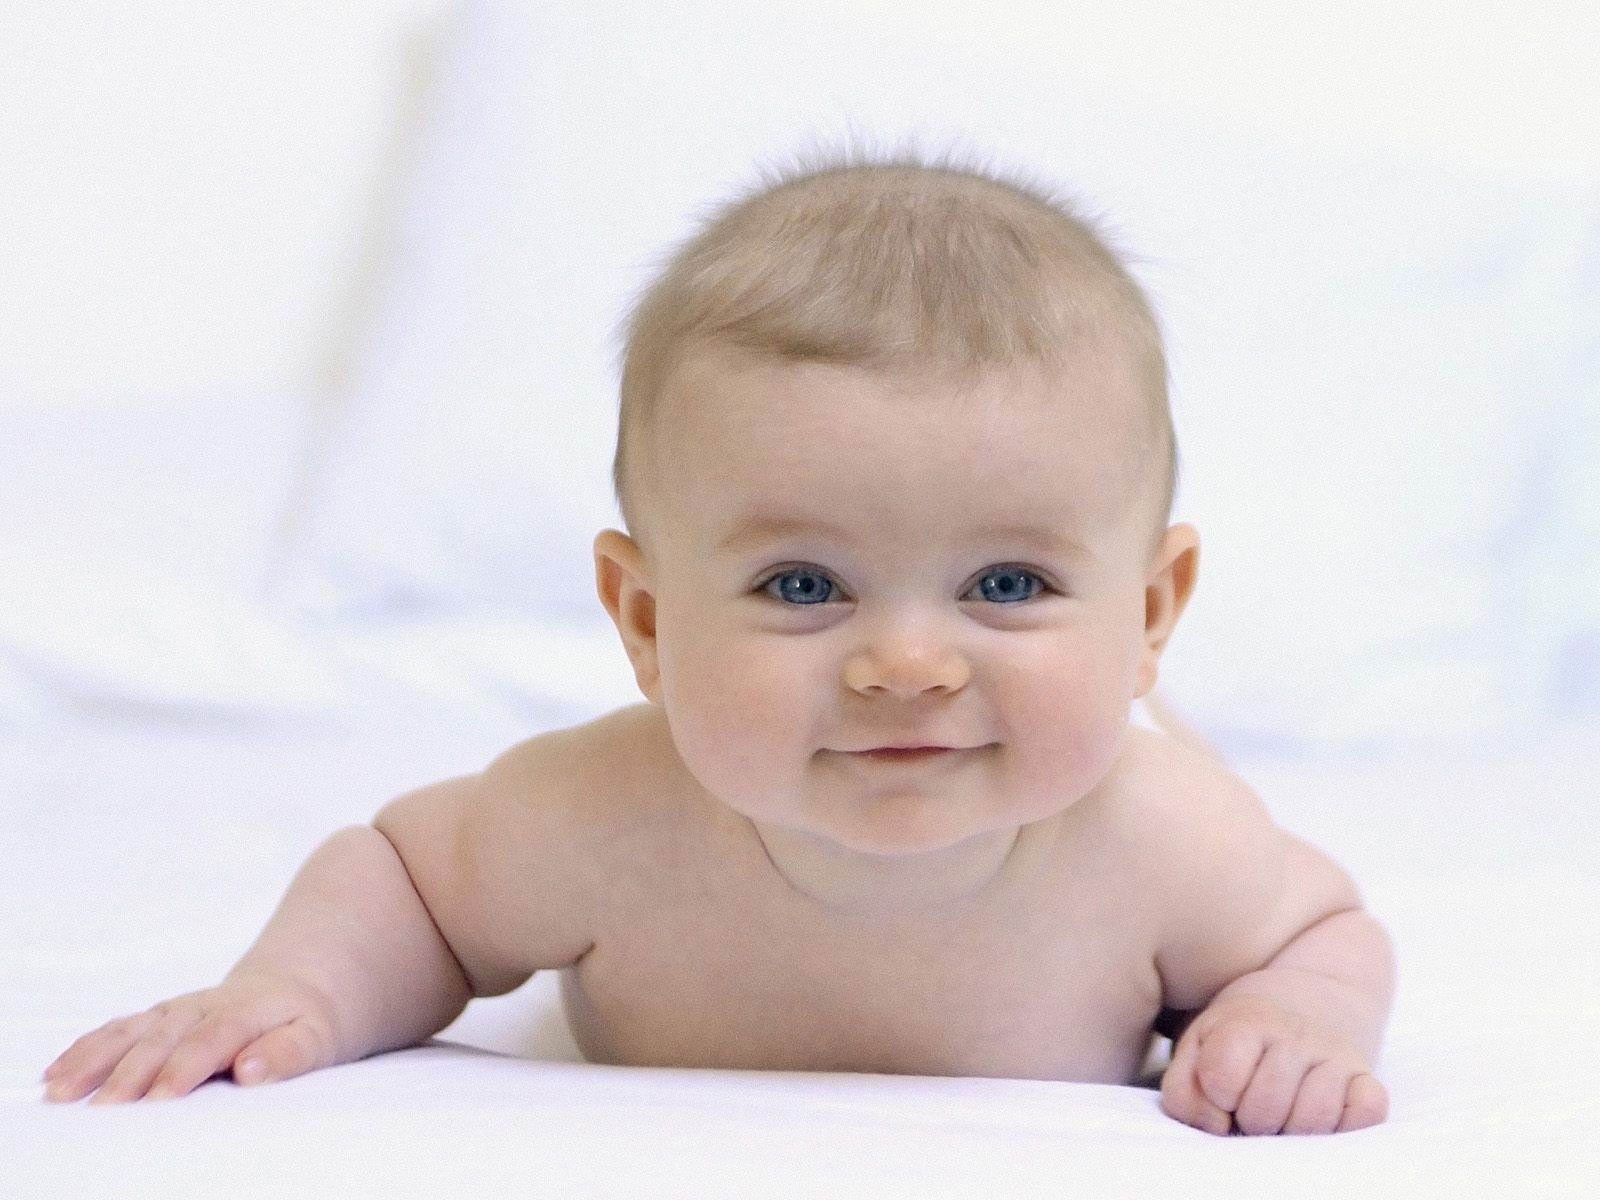  Cute Kids Wallpapers Smiling Crying Babies 6 New Baby Wallpapers 1600x1200